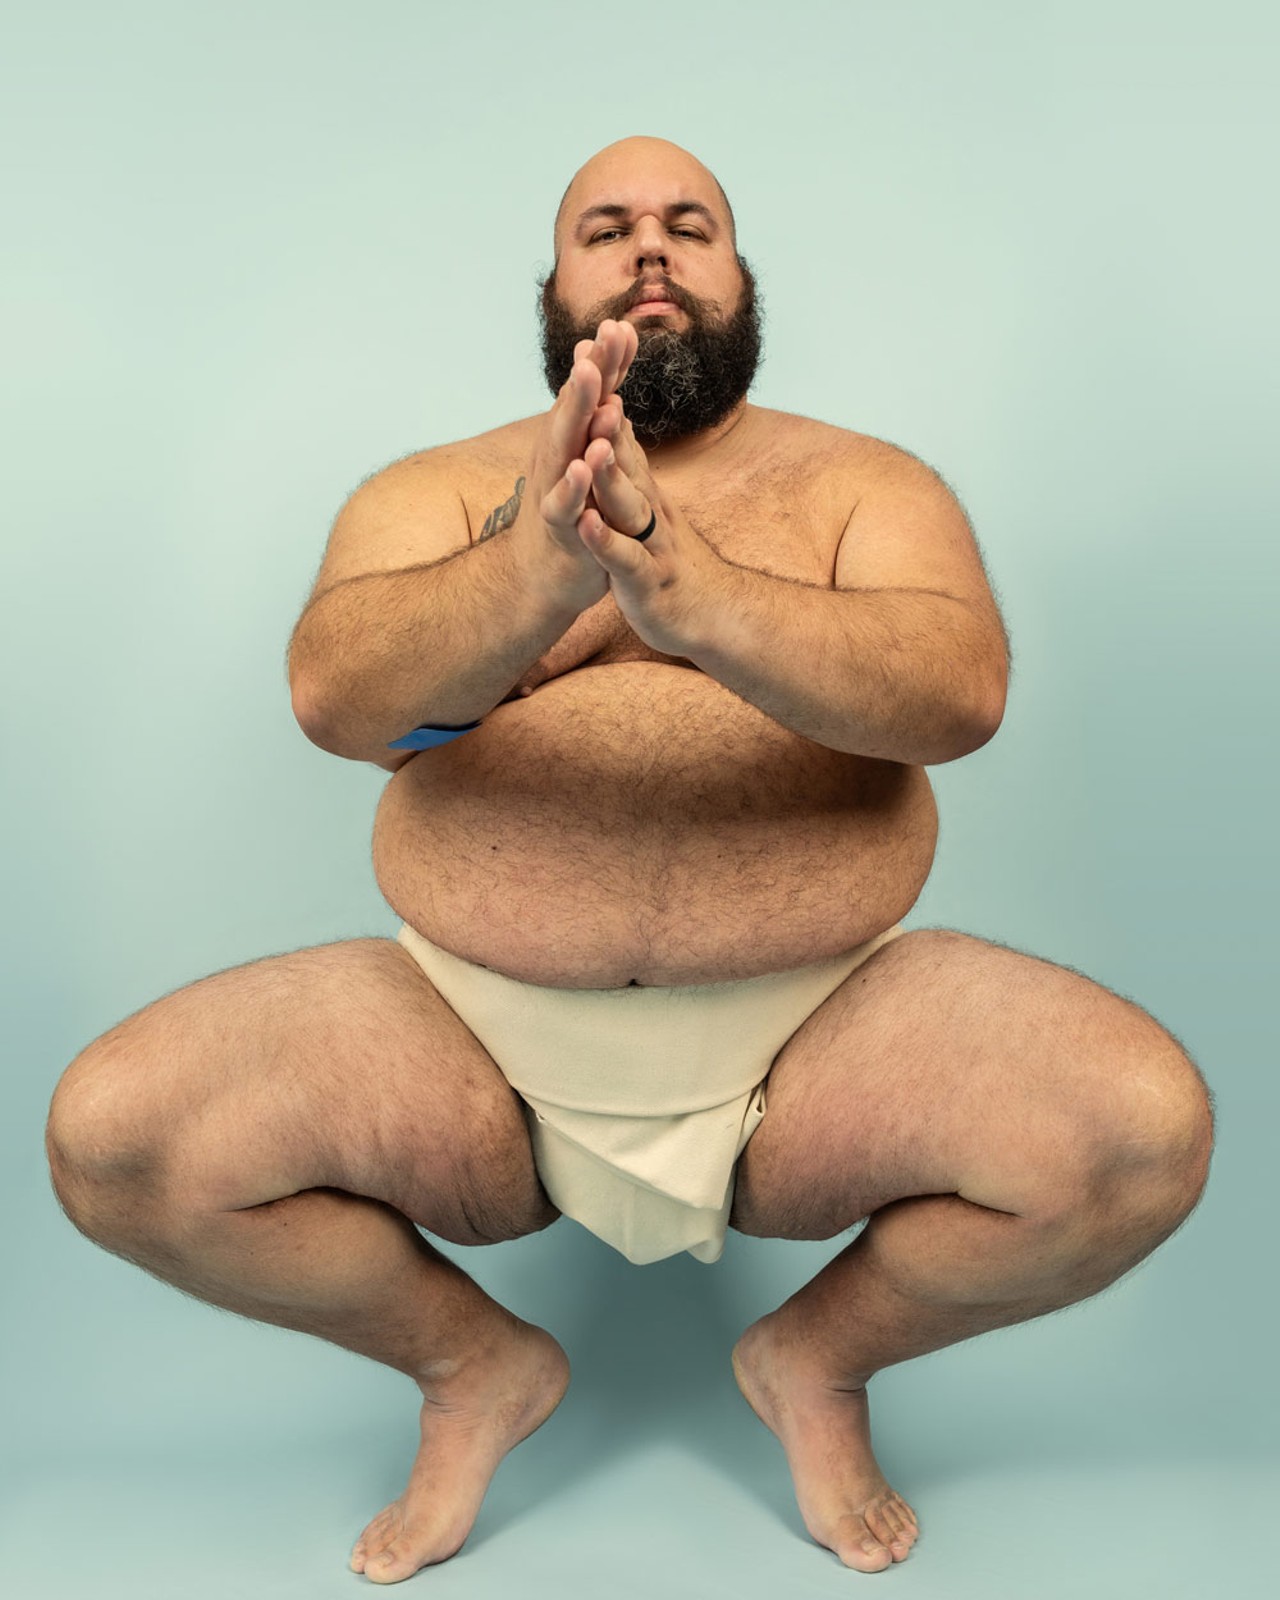 Veteran Florida Sumo Association member Alejandro Santana says one of the most important training needs in sumo sometimes comes as a shock to most outsiders: flexibility training.